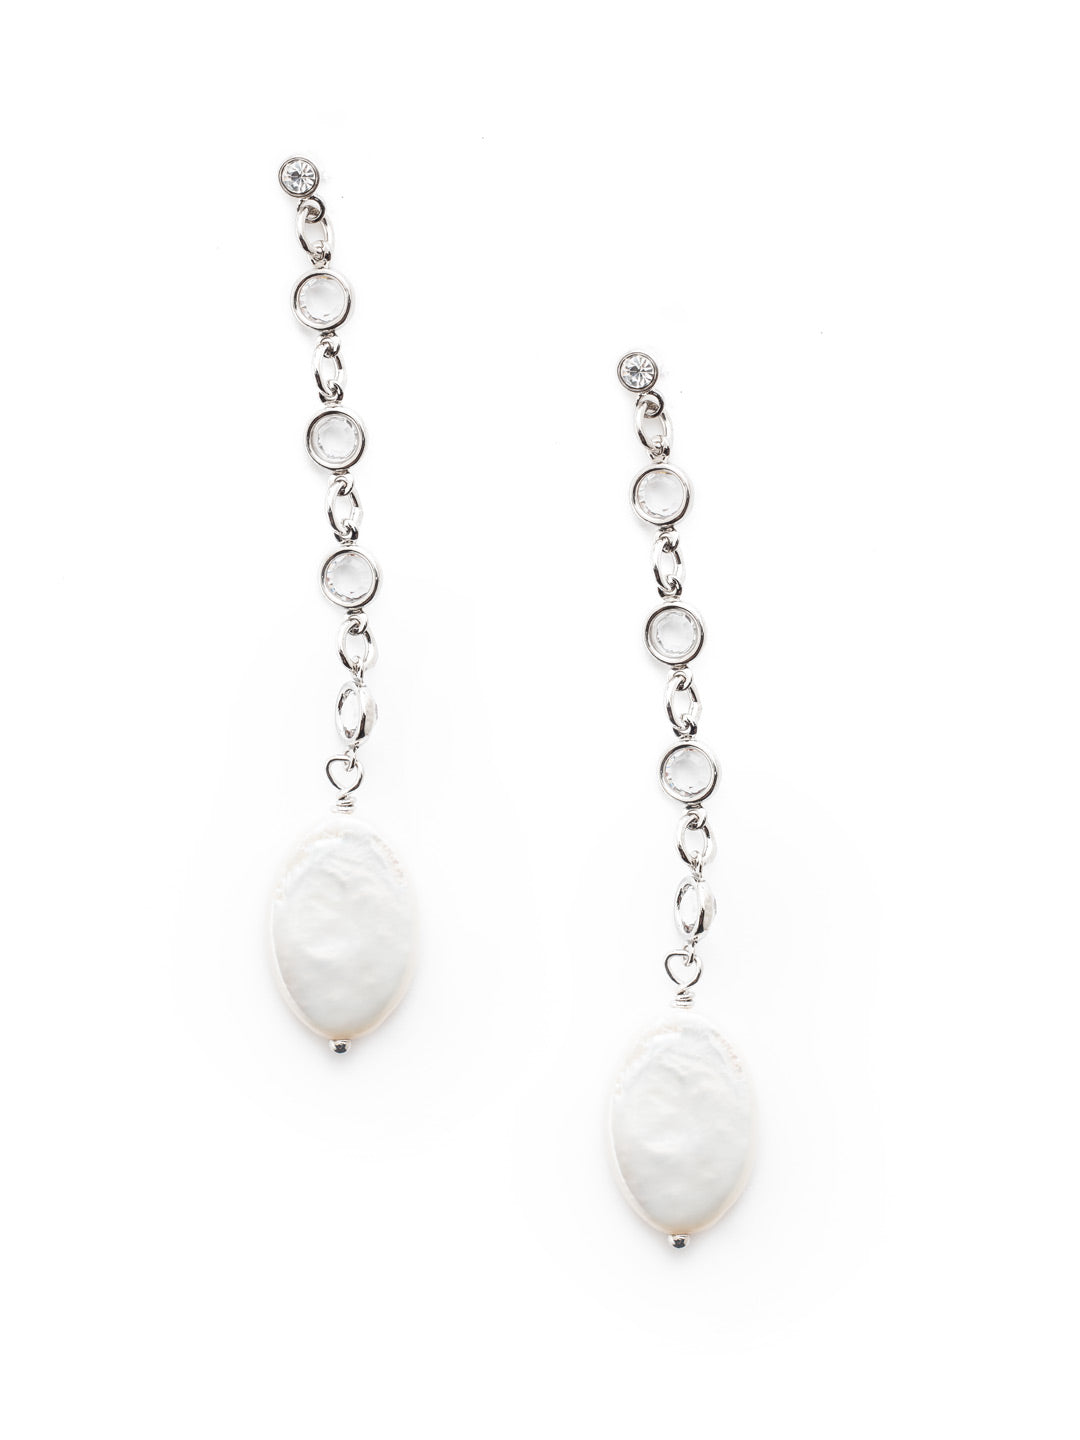 Fernanda Dangle Earrings - EET82RHMDP - <p>A delicate chain with beautiful clear gems that gradually descends a freshwater pearl. These earrings offer a hint of elegance. From Sorrelli's Modern Pearl collection in our Palladium Silver-tone finish.</p>